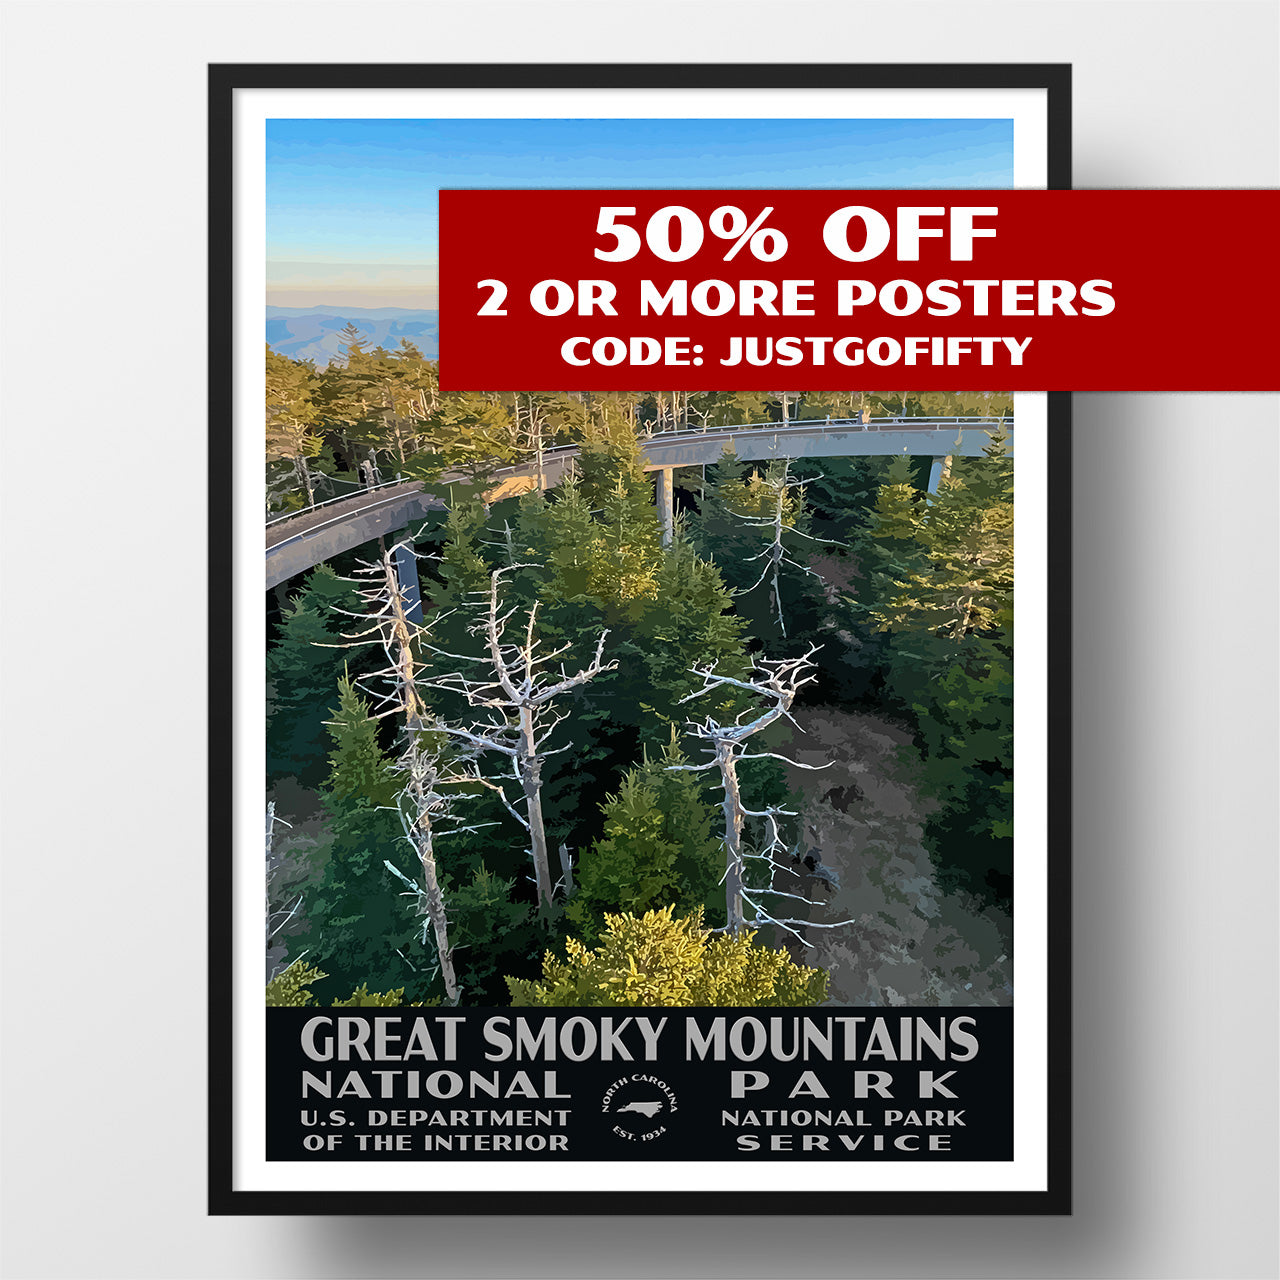 Great Smoky Mountains National Park Poster-WPA (Clingmans Dome)